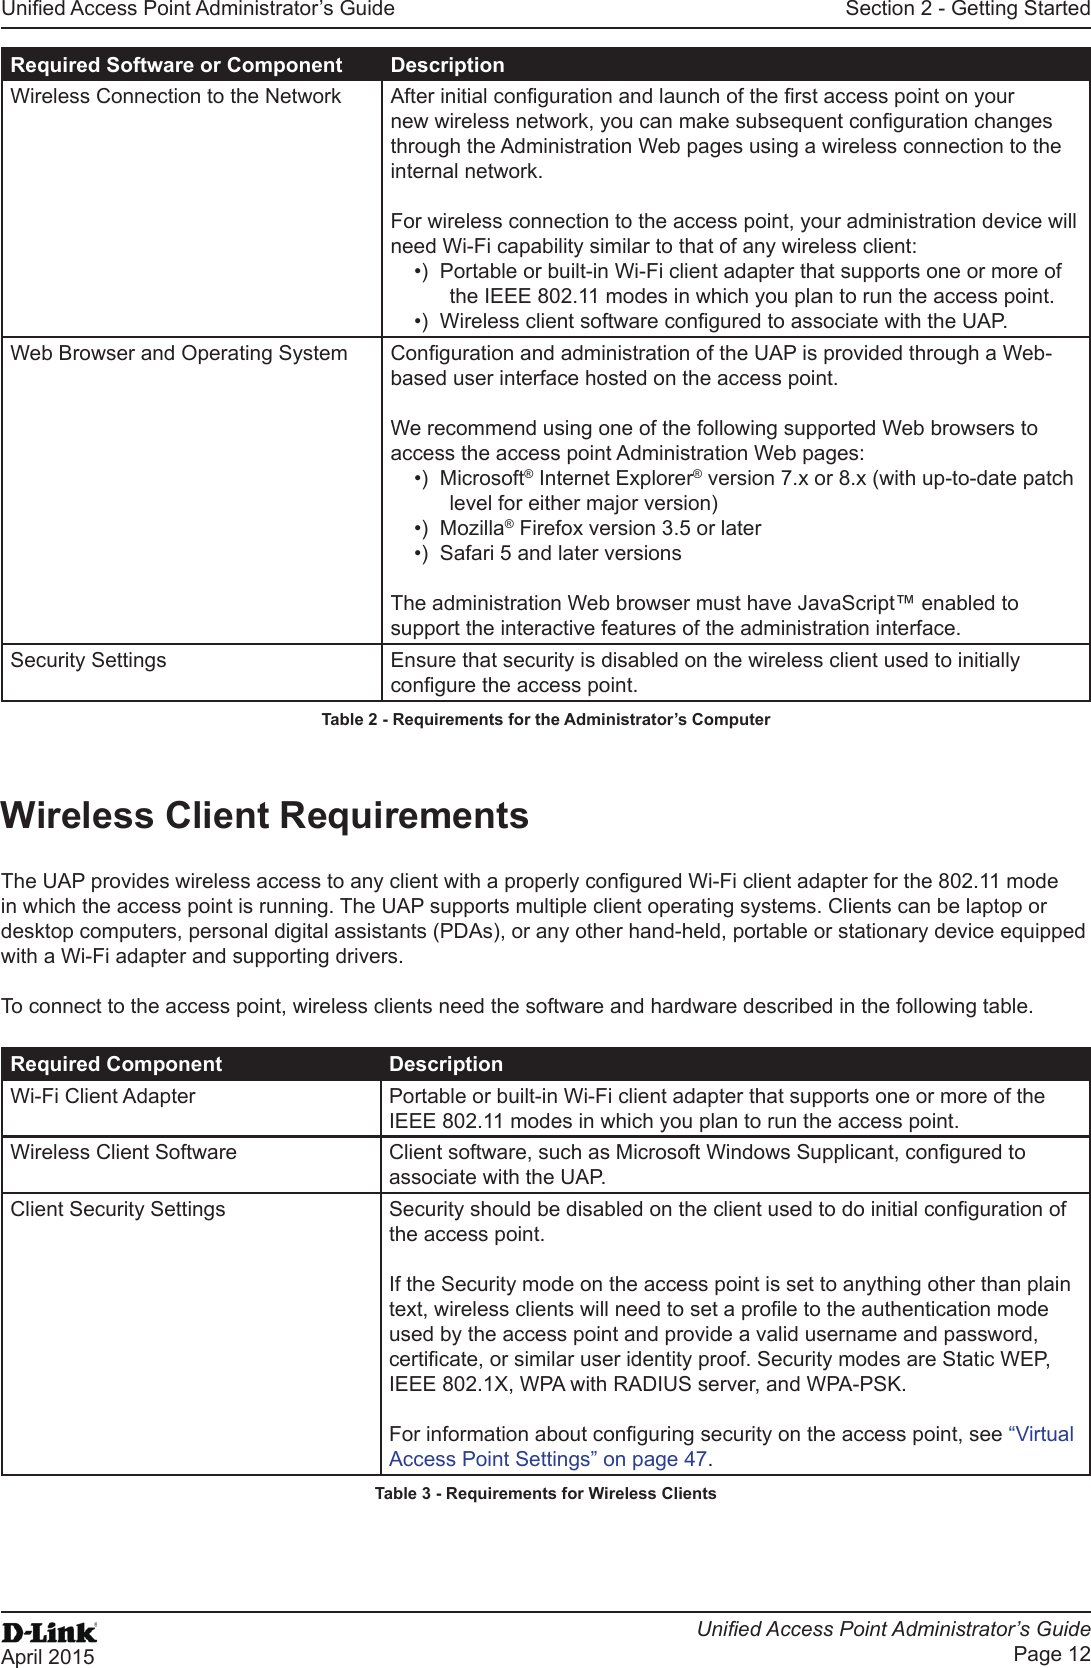 Unied Access Point Administrator’s GuideUnied Access Point Administrator’s GuidePage 12April 2015Section 2 - Getting StartedRequired Software or Component DescriptionWireless Connection to the Network After initial conguration and launch of the rst access point on your new wireless network, you can make subsequent conguration changes through the Administration Web pages using a wireless connection to the internal network. For wireless connection to the access point, your administration device will need Wi-Fi capability similar to that of any wireless client:•)  Portable or built-in Wi-Fi client adapter that supports one or more of the IEEE 802.11 modes in which you plan to run the access point.•)  Wireless client software congured to associate with the UAP.Web Browser and Operating System Conguration and administration of the UAP is provided through a Web-based user interface hosted on the access point. We recommend using one of the following supported Web browsers to access the access point Administration Web pages:•)  Microsoft® Internet Explorer® version 7.x or 8.x (with up-to-date patch level for either major version)•)  Mozilla® Firefox version 3.5 or later•)  Safari 5 and later versionsThe administration Web browser must have JavaScript™ enabled to support the interactive features of the administration interface.Security Settings Ensure that security is disabled on the wireless client used to initially congure the access point.Table 2 - Requirements for the Administrator’s ComputerWireless Client RequirementsThe UAP provides wireless access to any client with a properly congured Wi-Fi client adapter for the 802.11 mode in which the access point is running. The UAP supports multiple client operating systems. Clients can be laptop or desktop computers, personal digital assistants (PDAs), or any other hand-held, portable or stationary device equipped with a Wi-Fi adapter and supporting drivers.To connect to the access point, wireless clients need the software and hardware described in the following table.Required Component DescriptionWi-Fi Client Adapter Portable or built-in Wi-Fi client adapter that supports one or more of the IEEE 802.11 modes in which you plan to run the access point.Wireless Client Software Client software, such as Microsoft Windows Supplicant, congured to associate with the UAP.Client Security Settings Security should be disabled on the client used to do initial conguration of the access point.If the Security mode on the access point is set to anything other than plain text, wireless clients will need to set a prole to the authentication mode used by the access point and provide a valid username and password, certicate, or similar user identity proof. Security modes are Static WEP, IEEE 802.1X, WPA with RADIUS server, and WPA-PSK.For information about conguring security on the access point, see “Virtual Access Point Settings” on page 47. Table 3 - Requirements for Wireless Clients